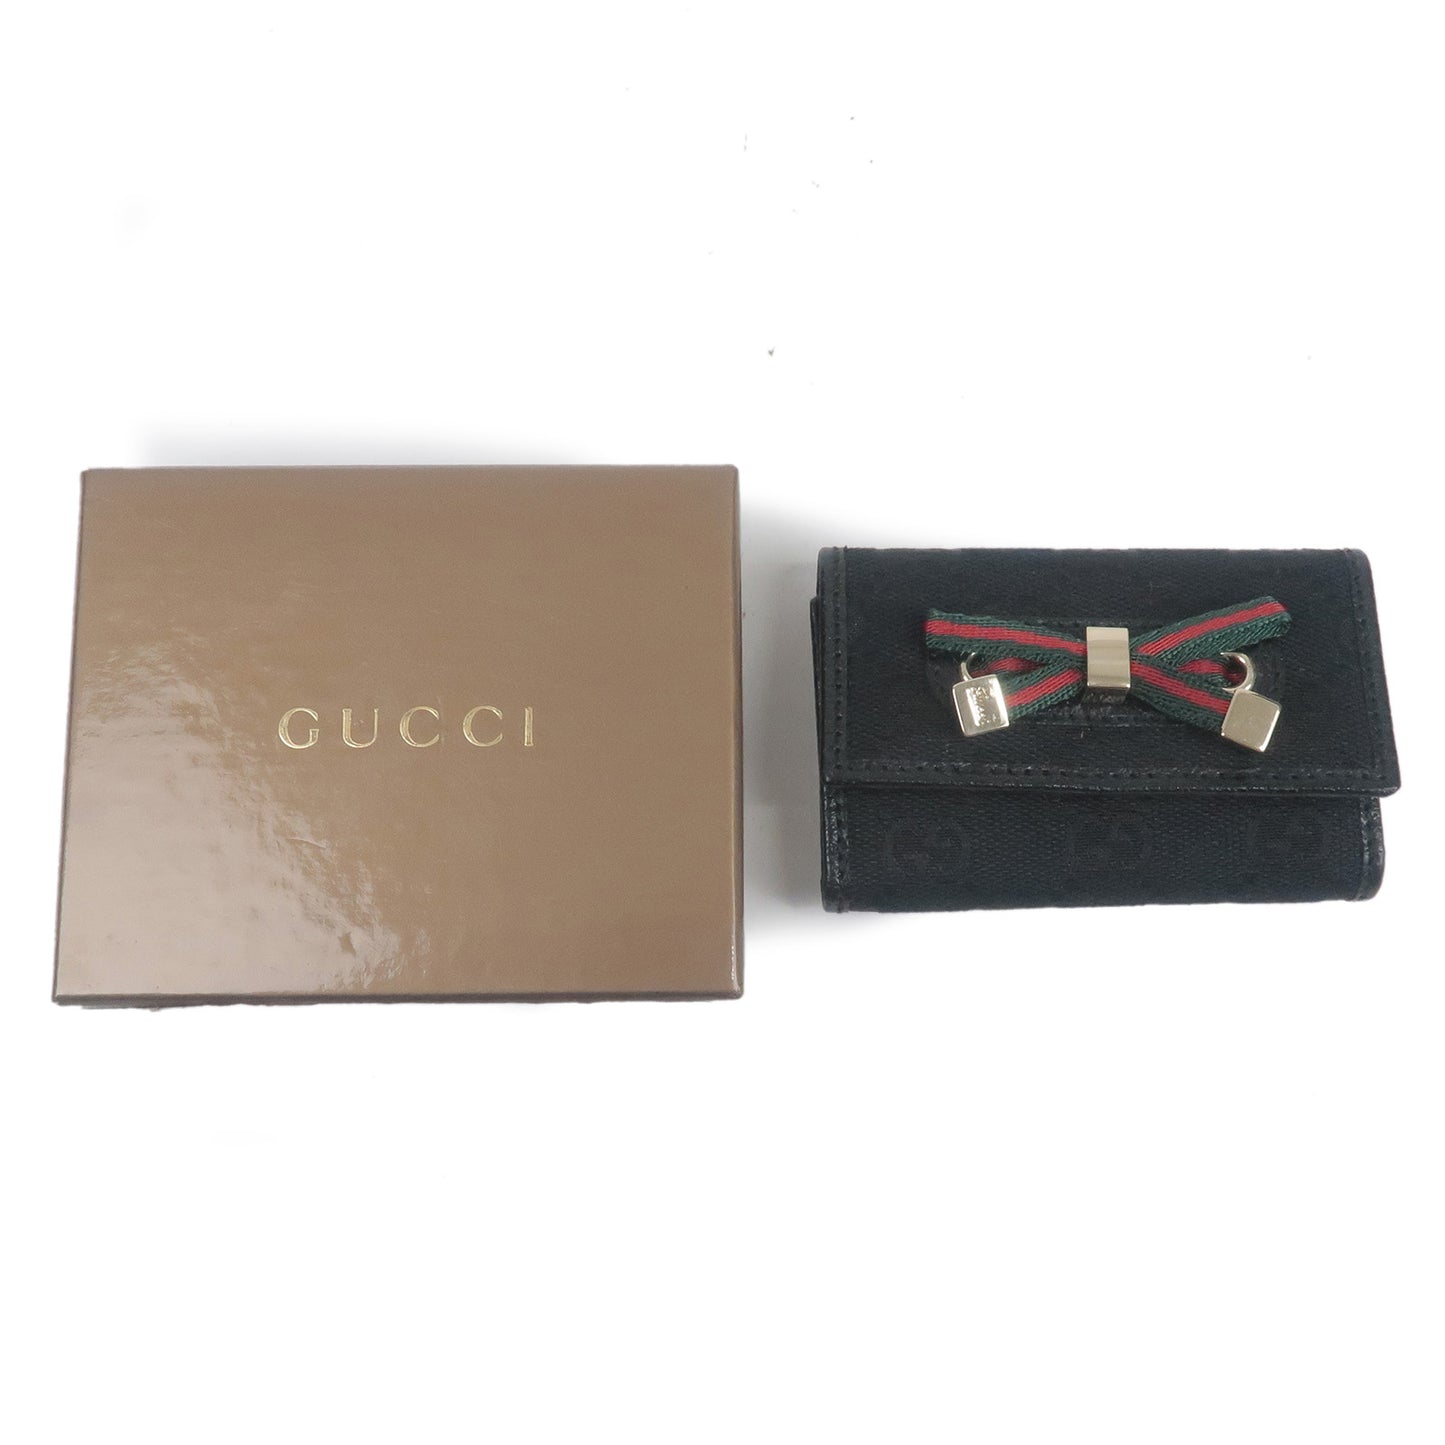 GUCCI Sherry Princy GG Canvas Leather 6 Ring Key Case Black 162770